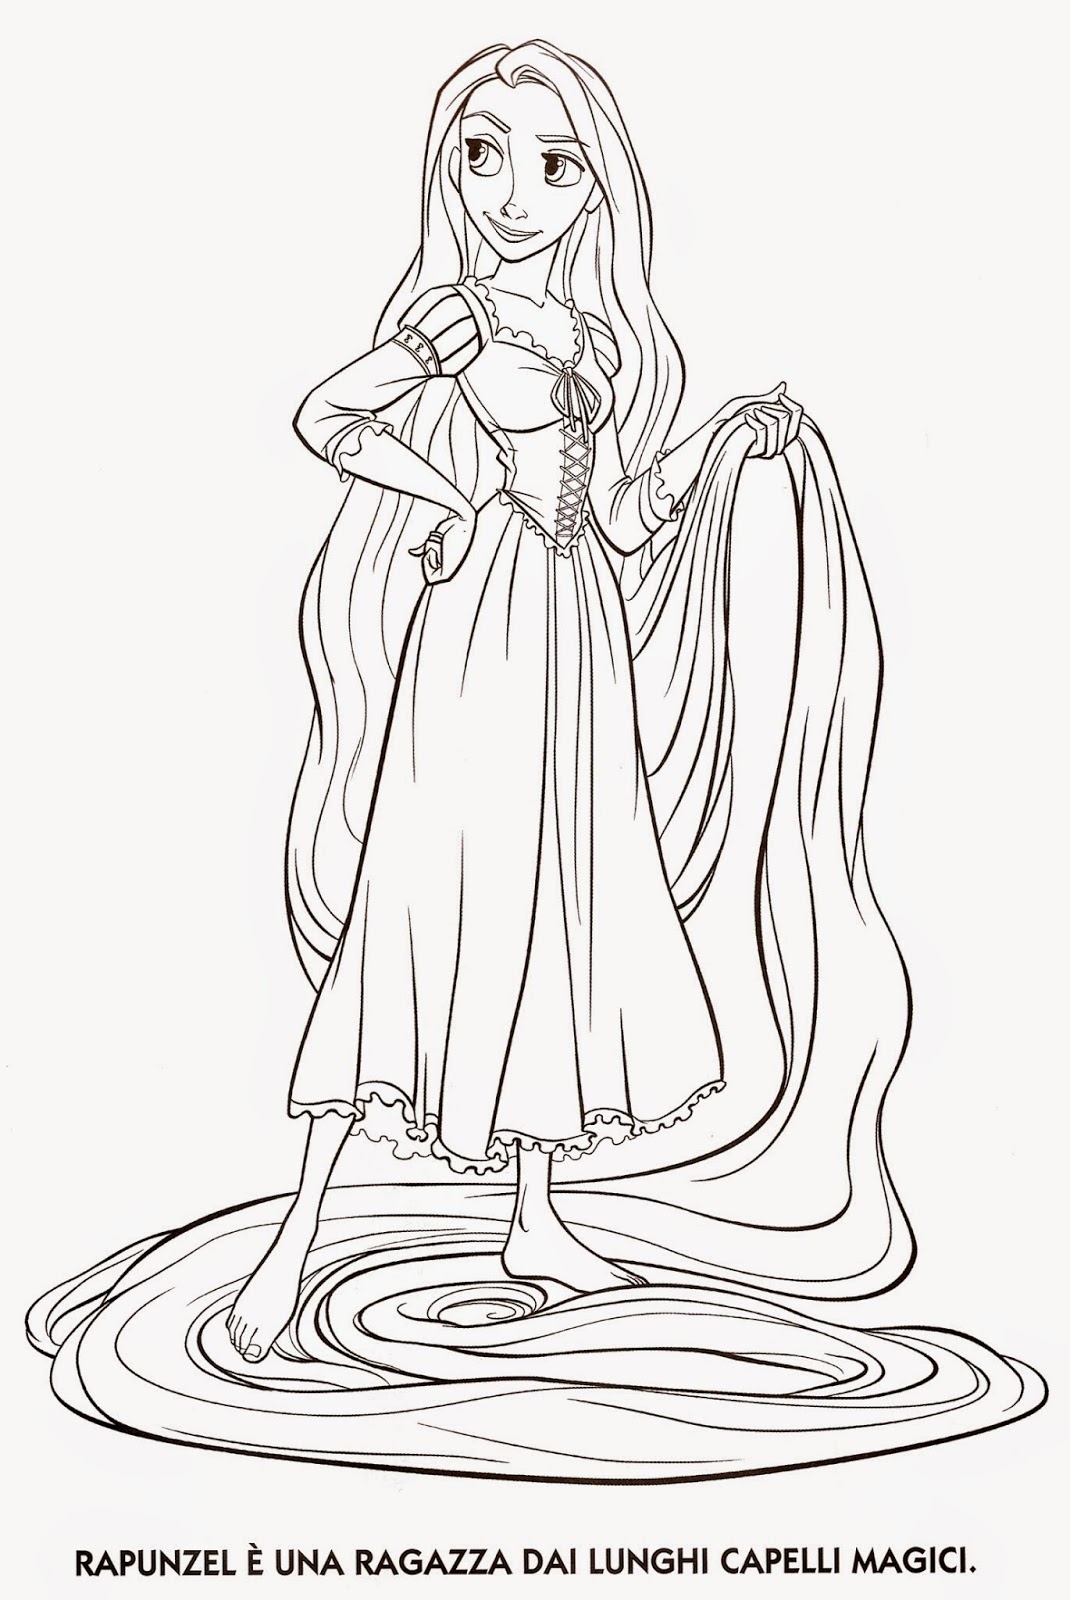 Coloring Pages: "Tangled" Free Printable Coloring Pages of Rapunzel